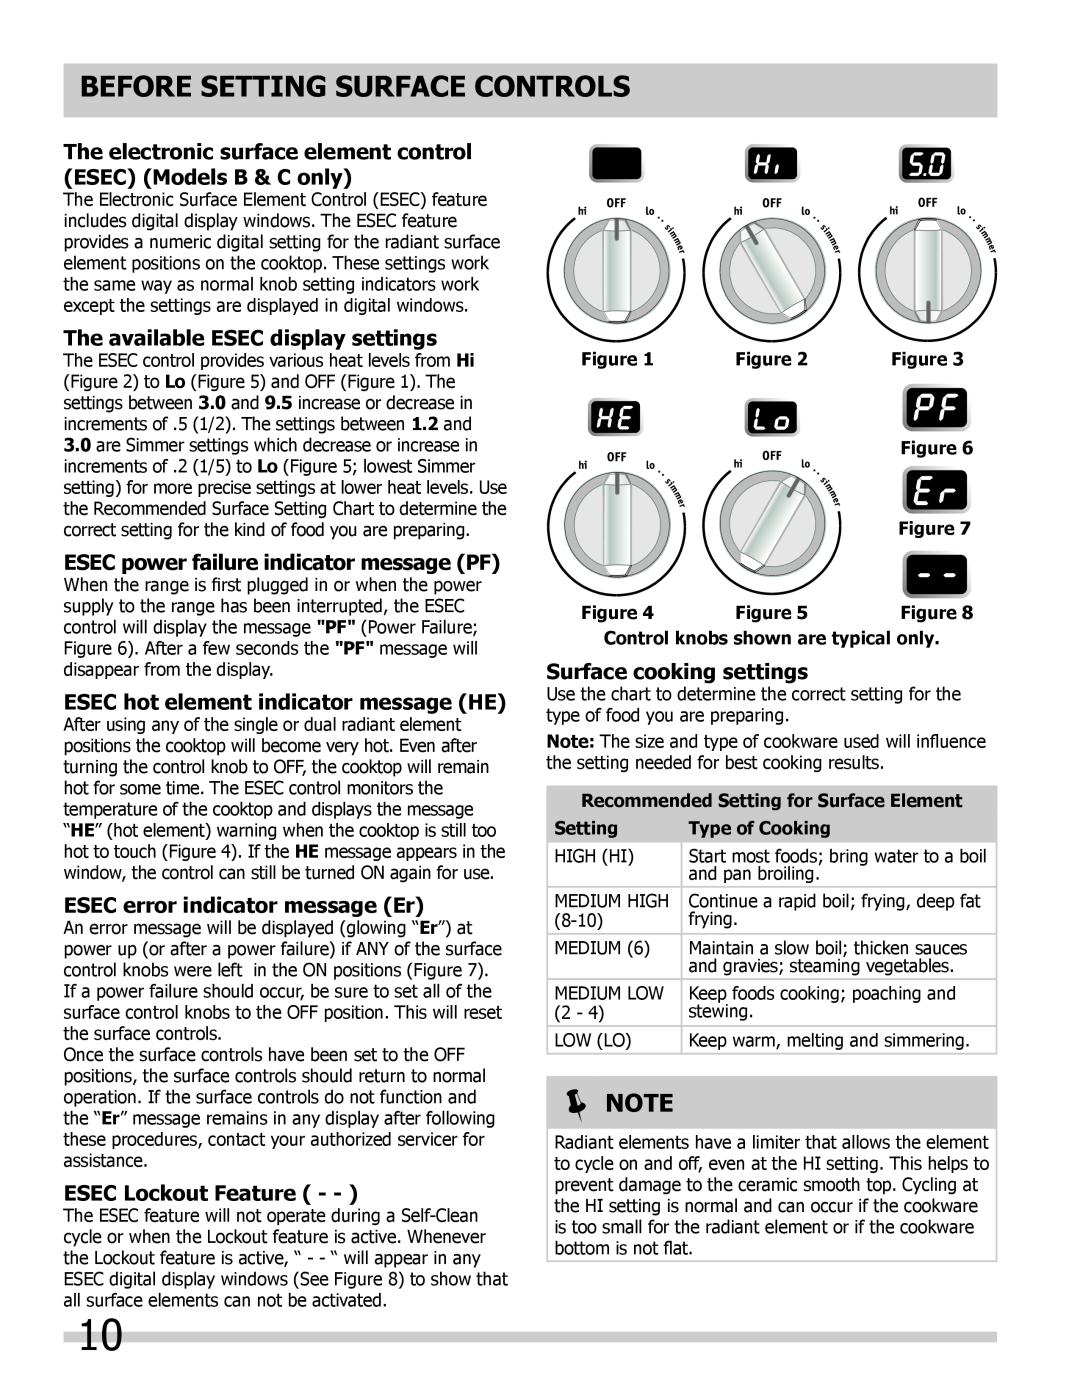 Frigidaire FGES3045KB The electronic surface element control ESEC Models B & C only, The available ESEC display settings 